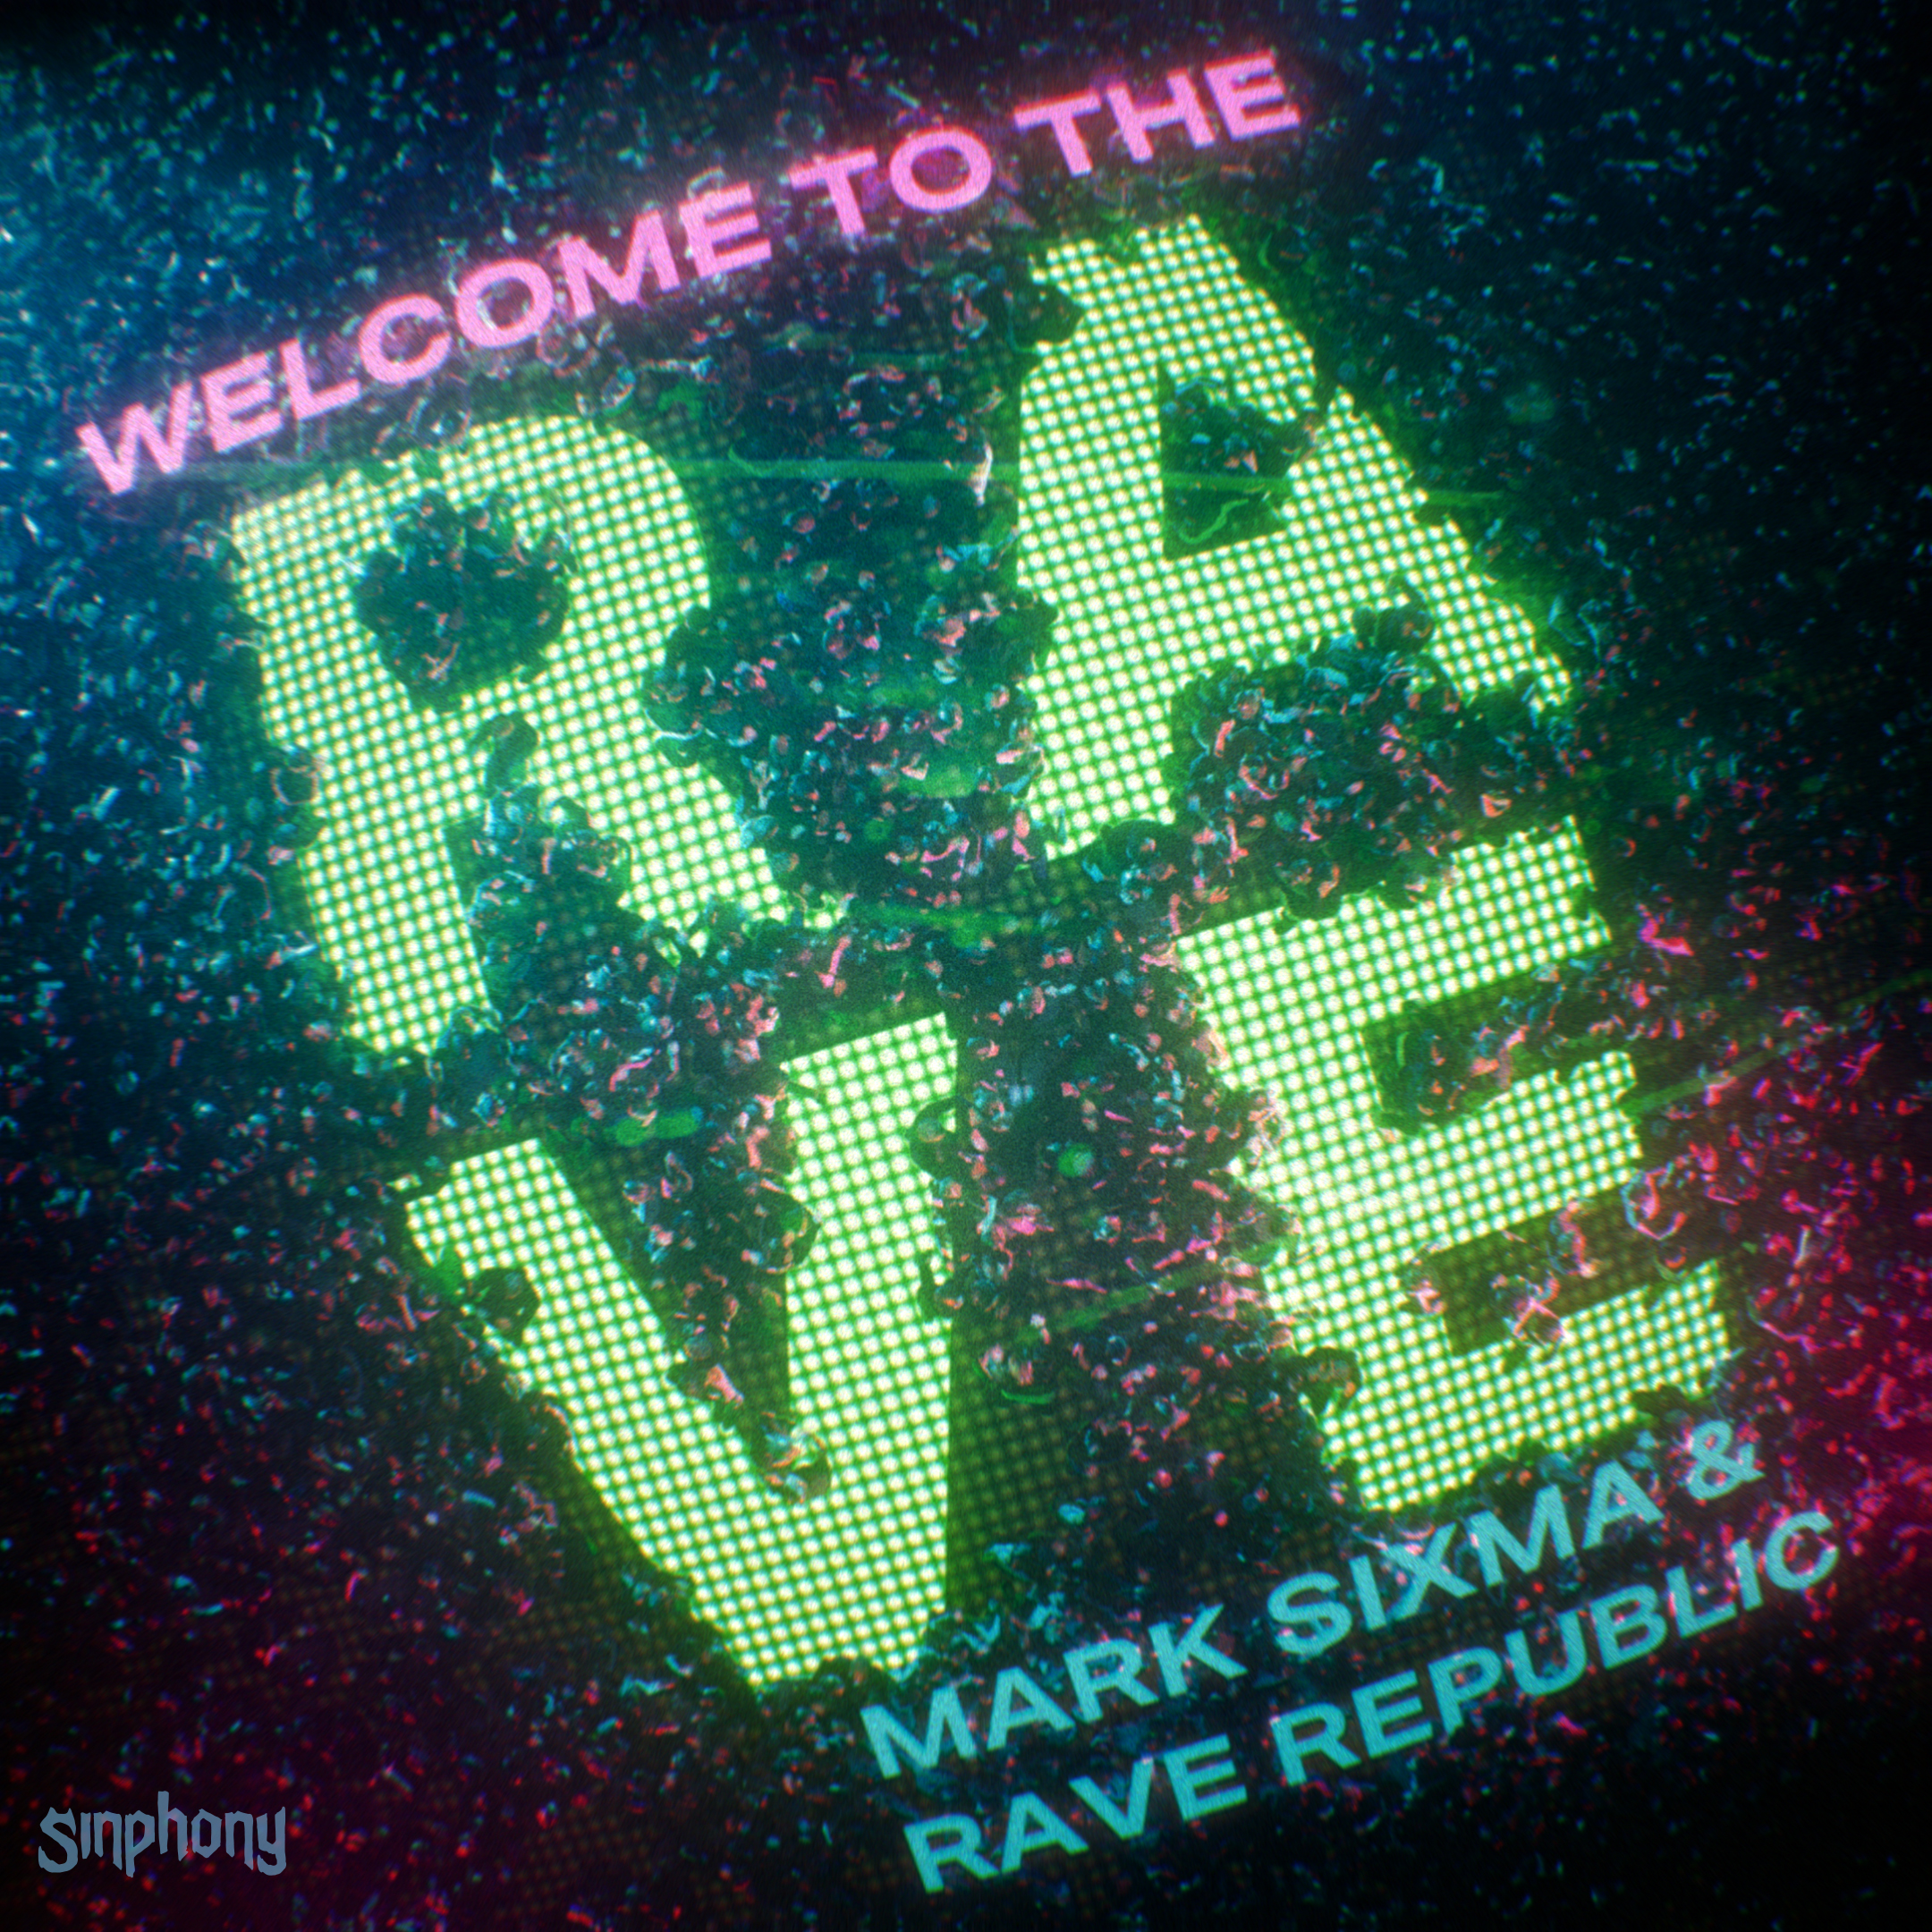 Mark Sixma & Rave Republic — Welcome To The Rave cover artwork